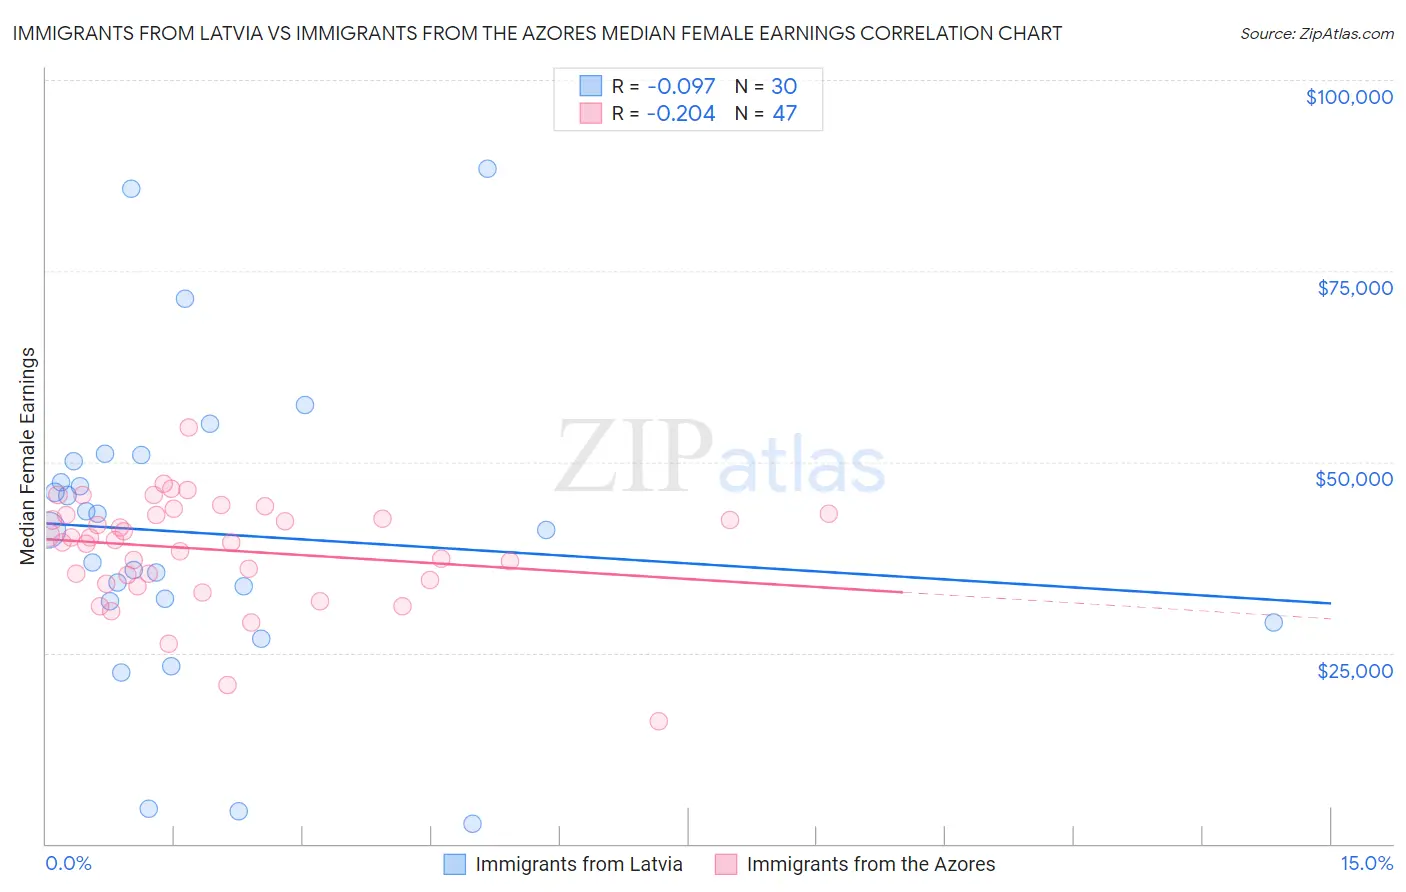 Immigrants from Latvia vs Immigrants from the Azores Median Female Earnings